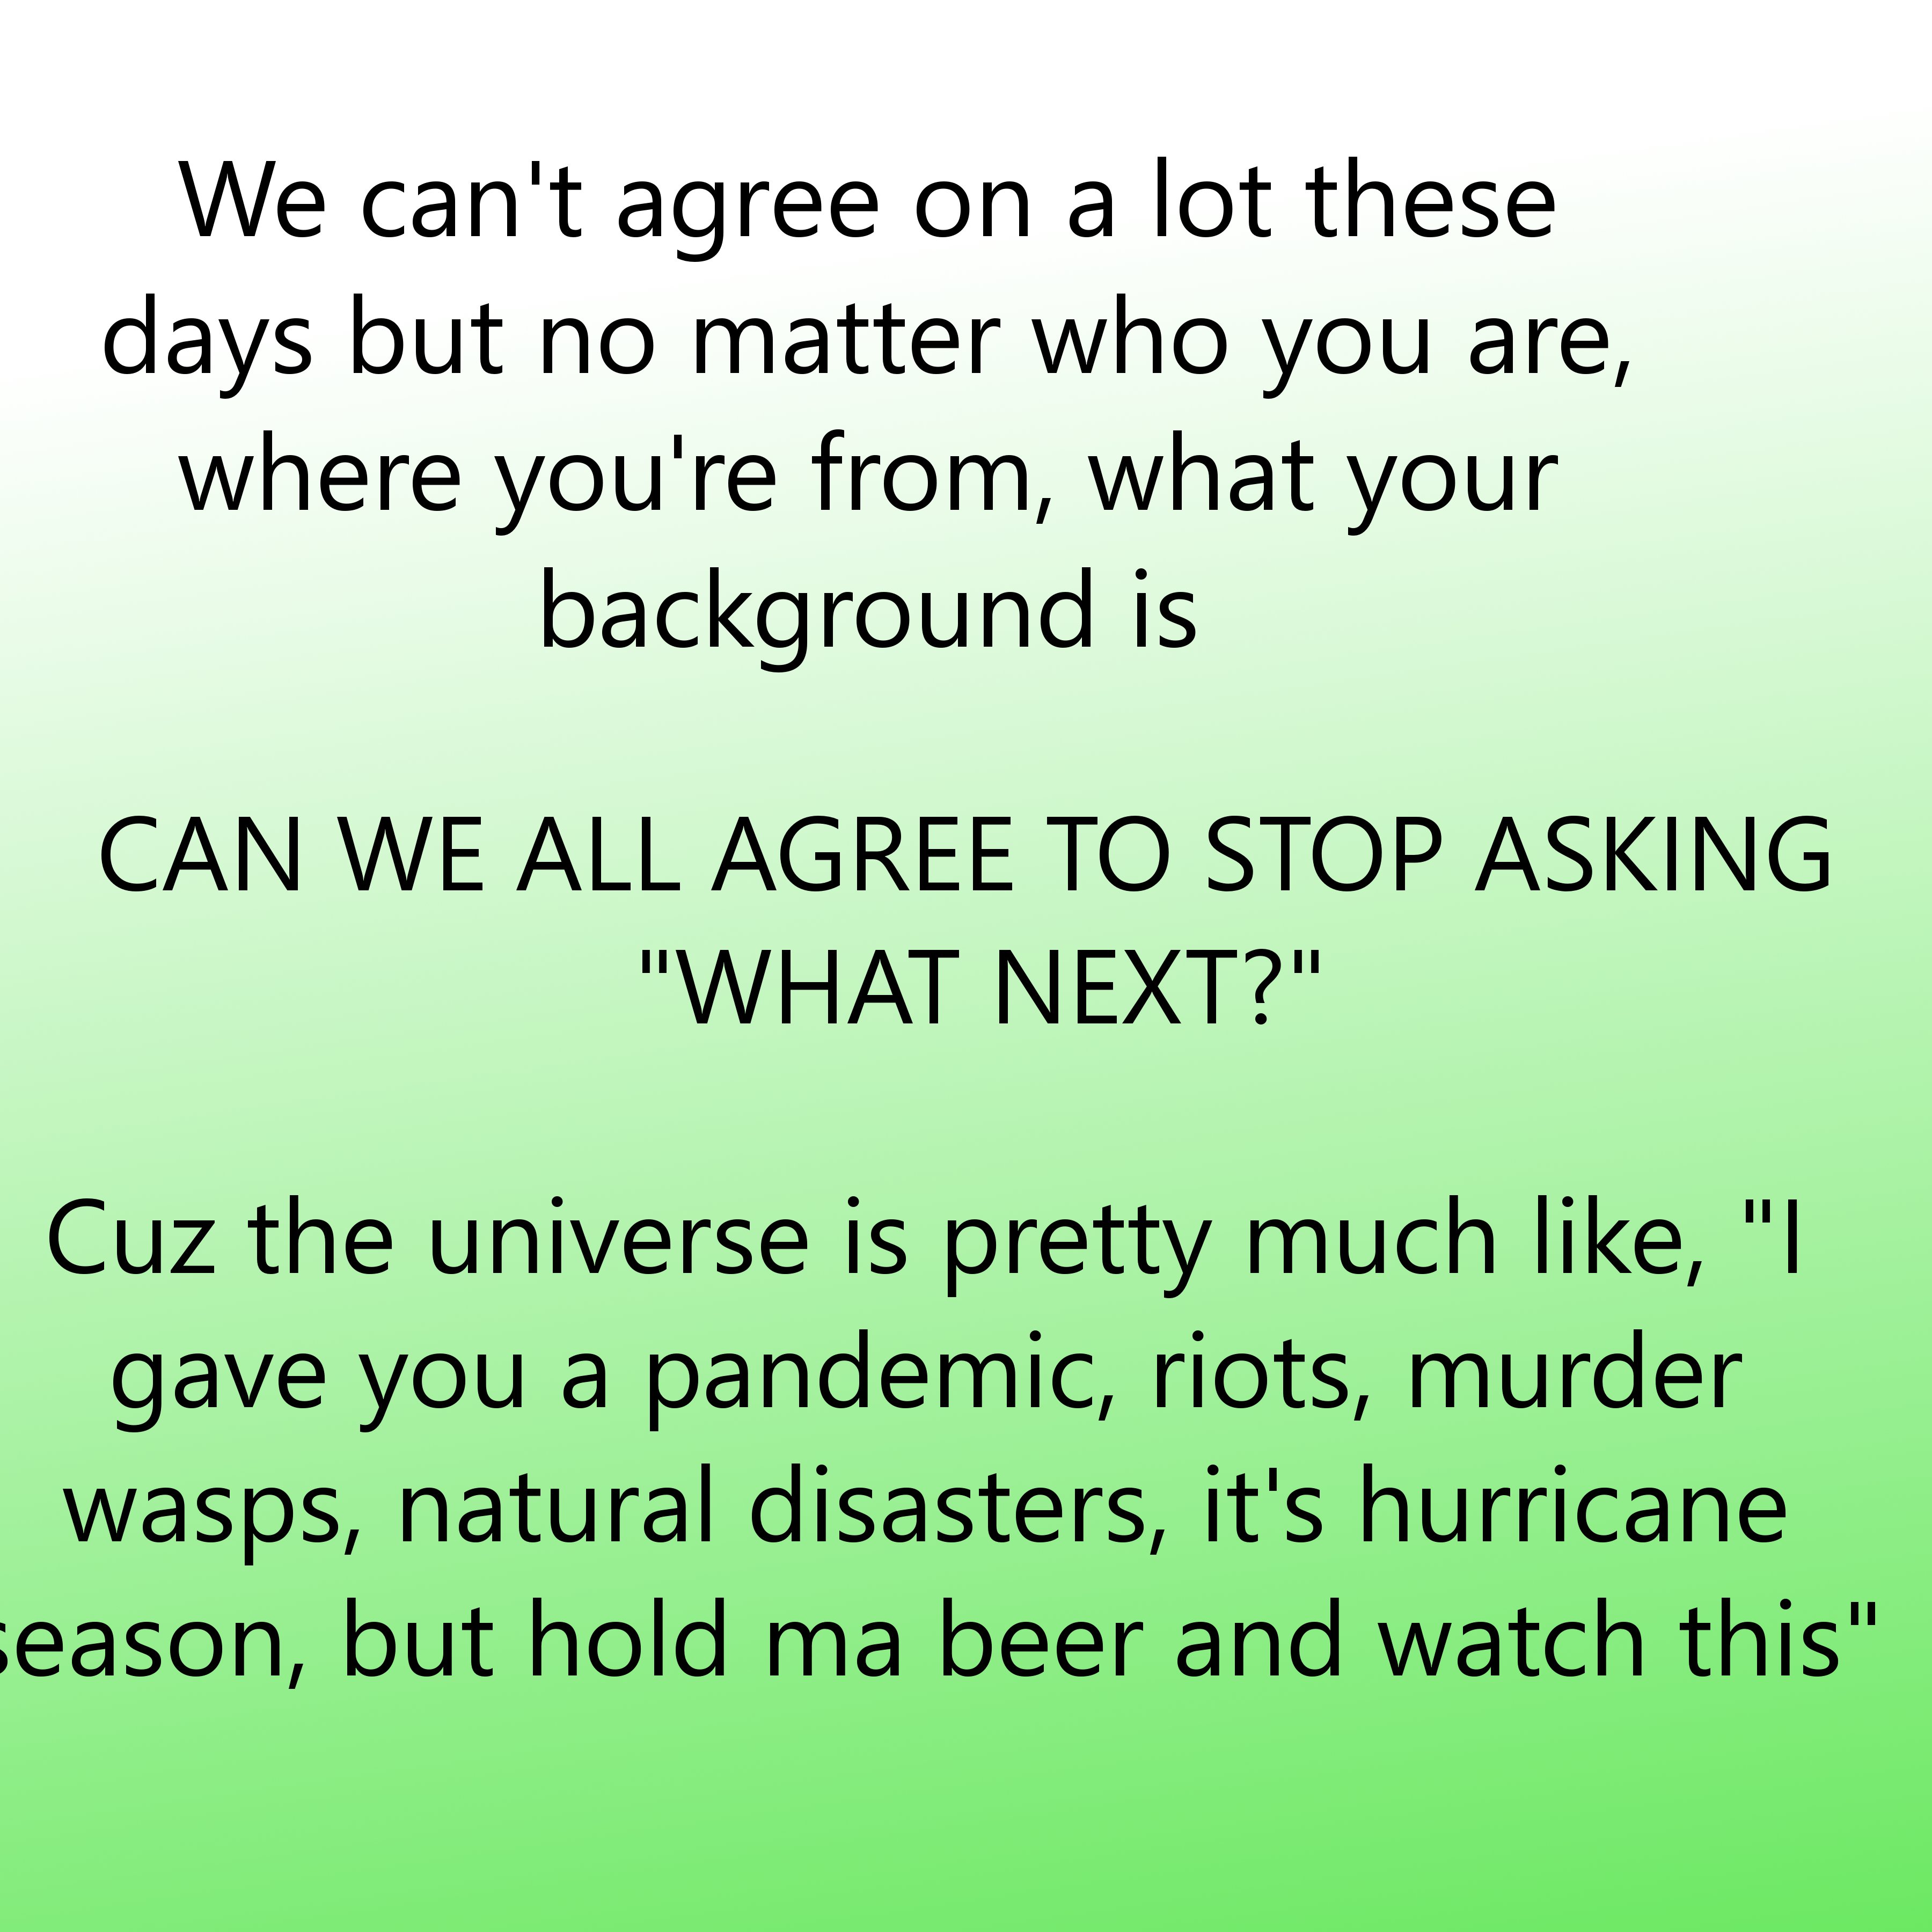 playground dad - We can't agree on a lot these days but no matter who you are, where you're from, what your background is Can We All Agree To Stop Asking "What Next?" Cuz the universe is pretty much , "I gave you a pandemic, riots, murder wasps, natural d